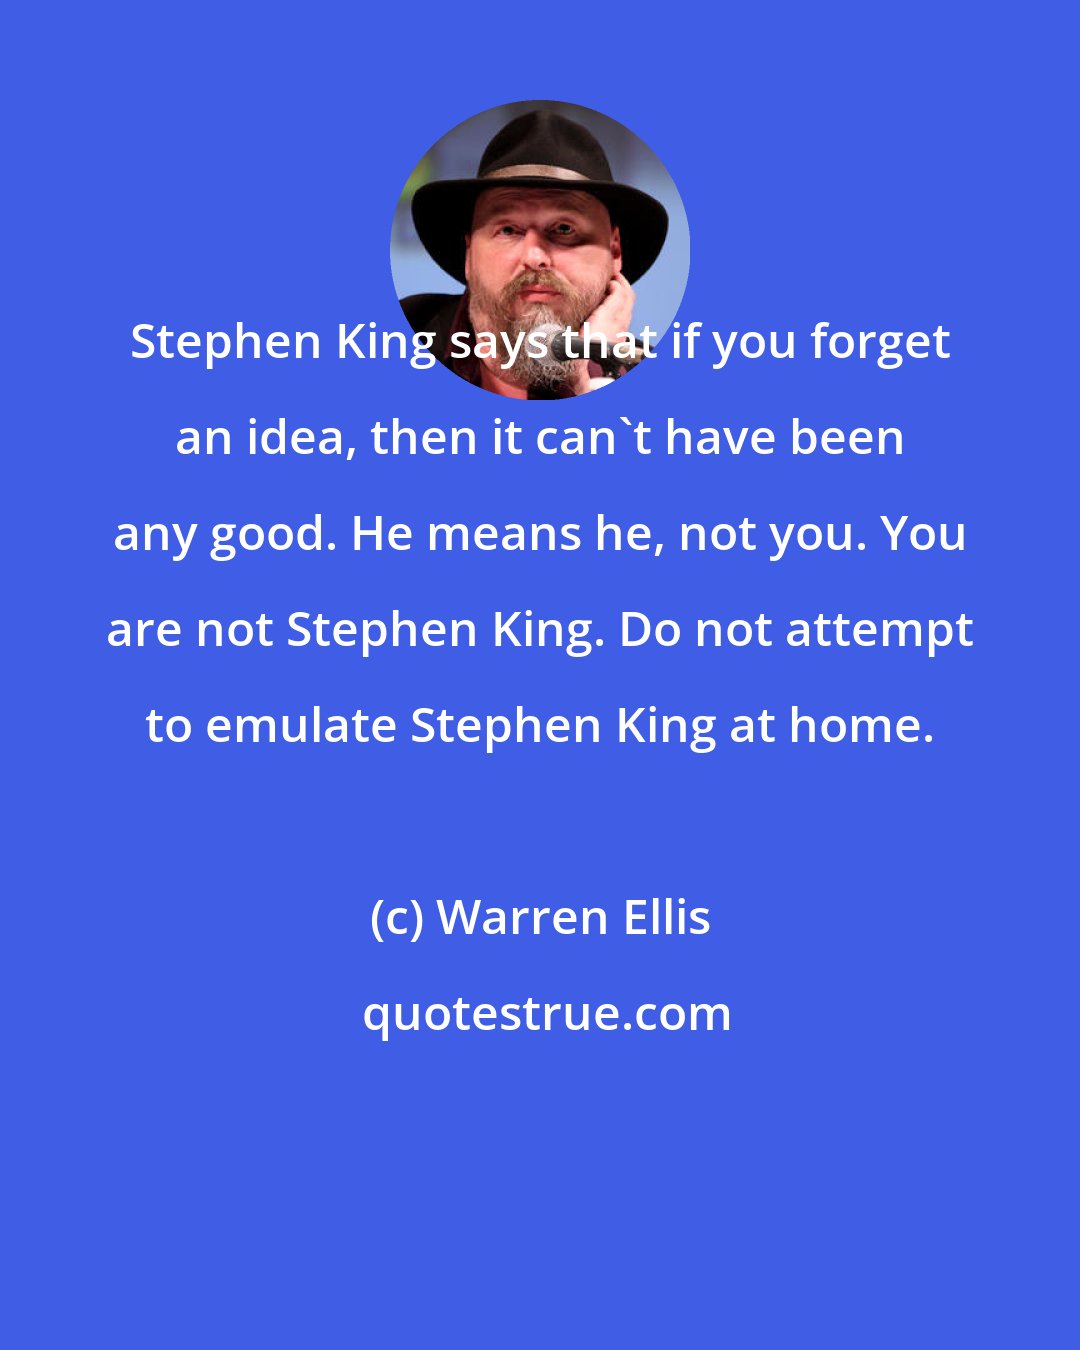 Warren Ellis: Stephen King says that if you forget an idea, then it can't have been any good. He means he, not you. You are not Stephen King. Do not attempt to emulate Stephen King at home.